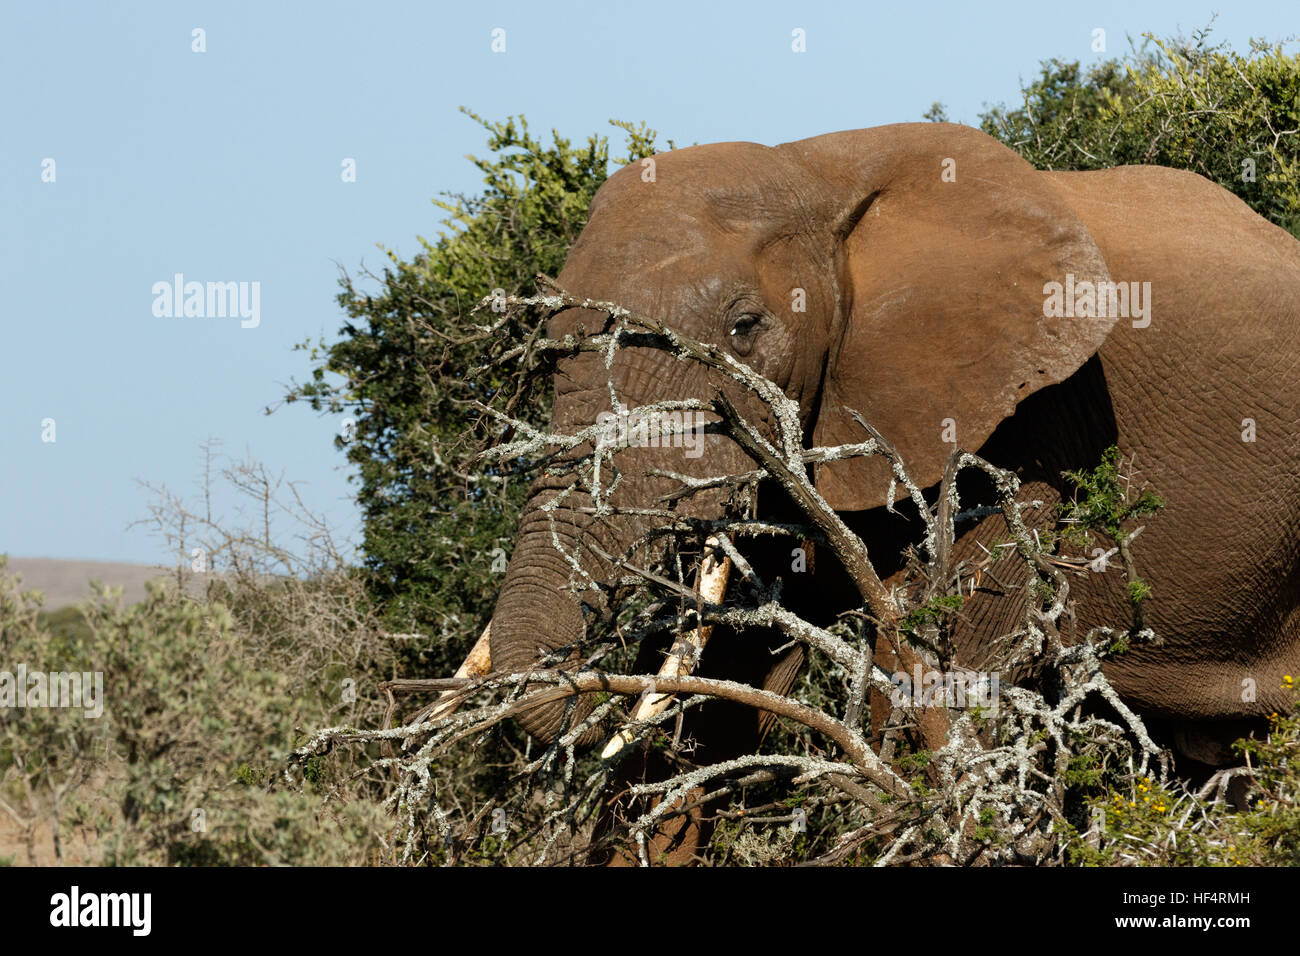 Bush Elephant hiding behind the branches in the field. Stock Photo